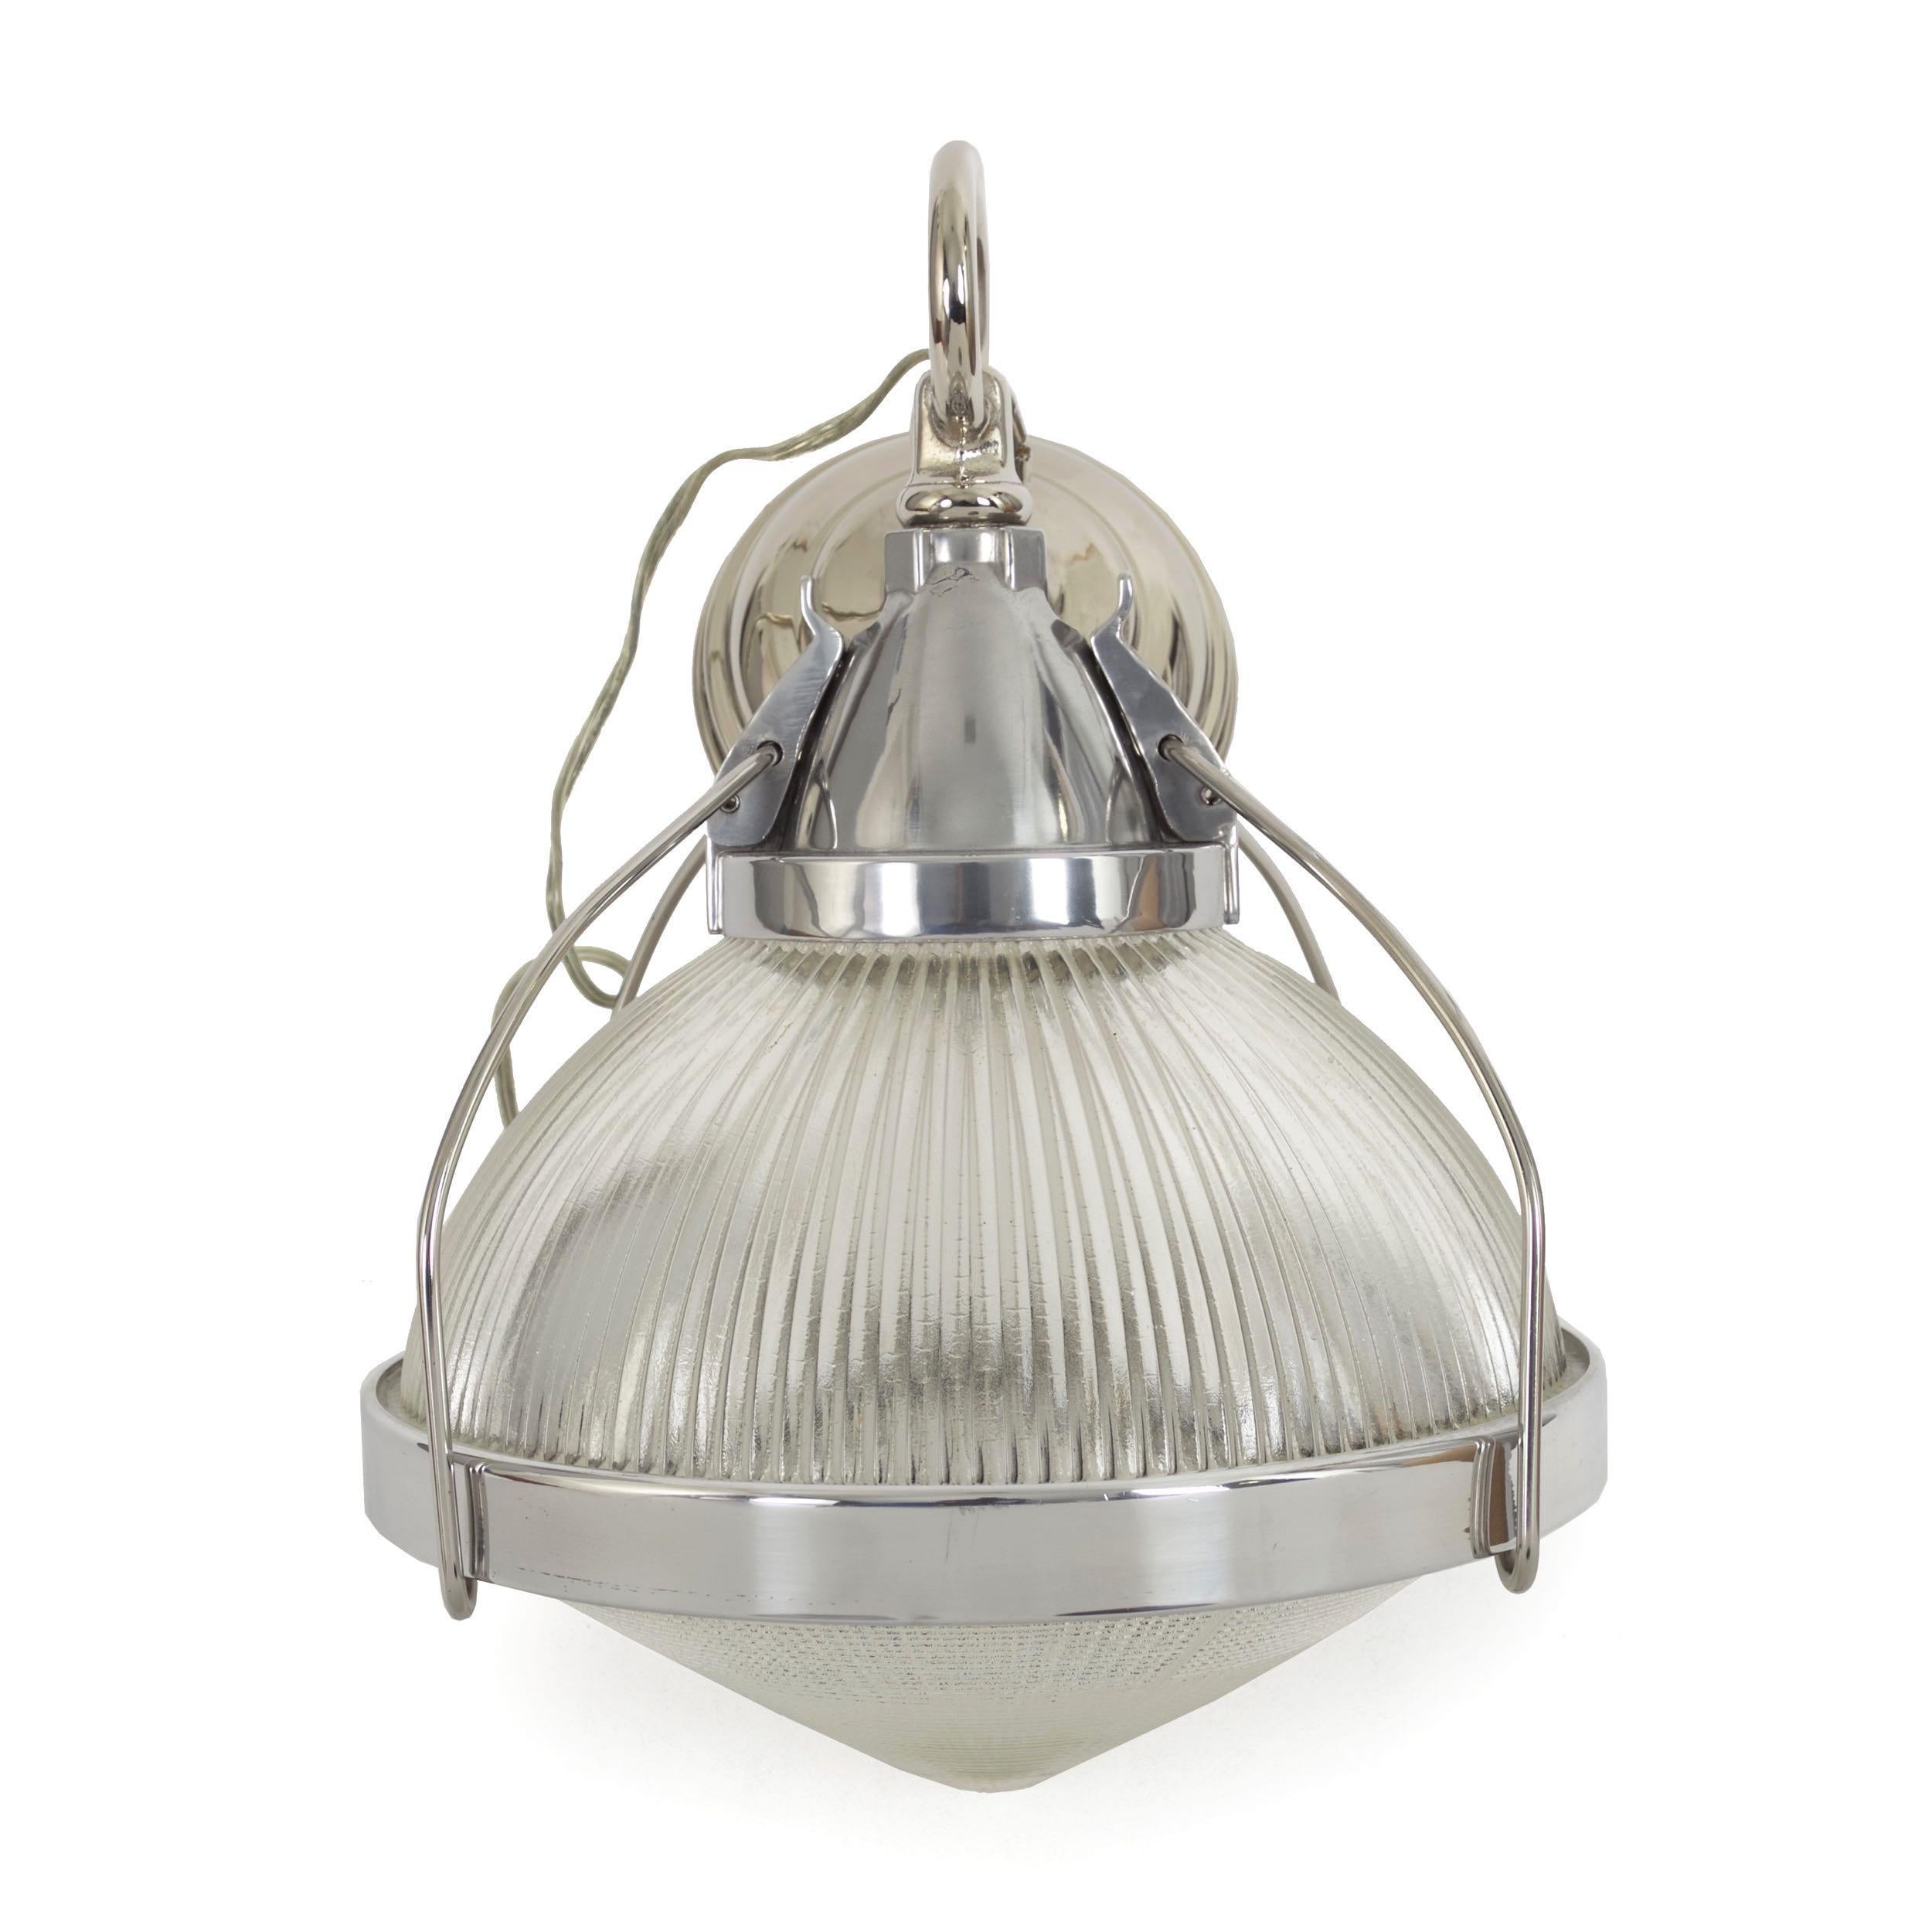 A sleek and interesting vintage industrial pendant light, it features a gorgeous high-polish chrome against polished aluminum around the molded holophane glass. All hardware is of very high quality and the lamp has been thoughtfully designed: cast